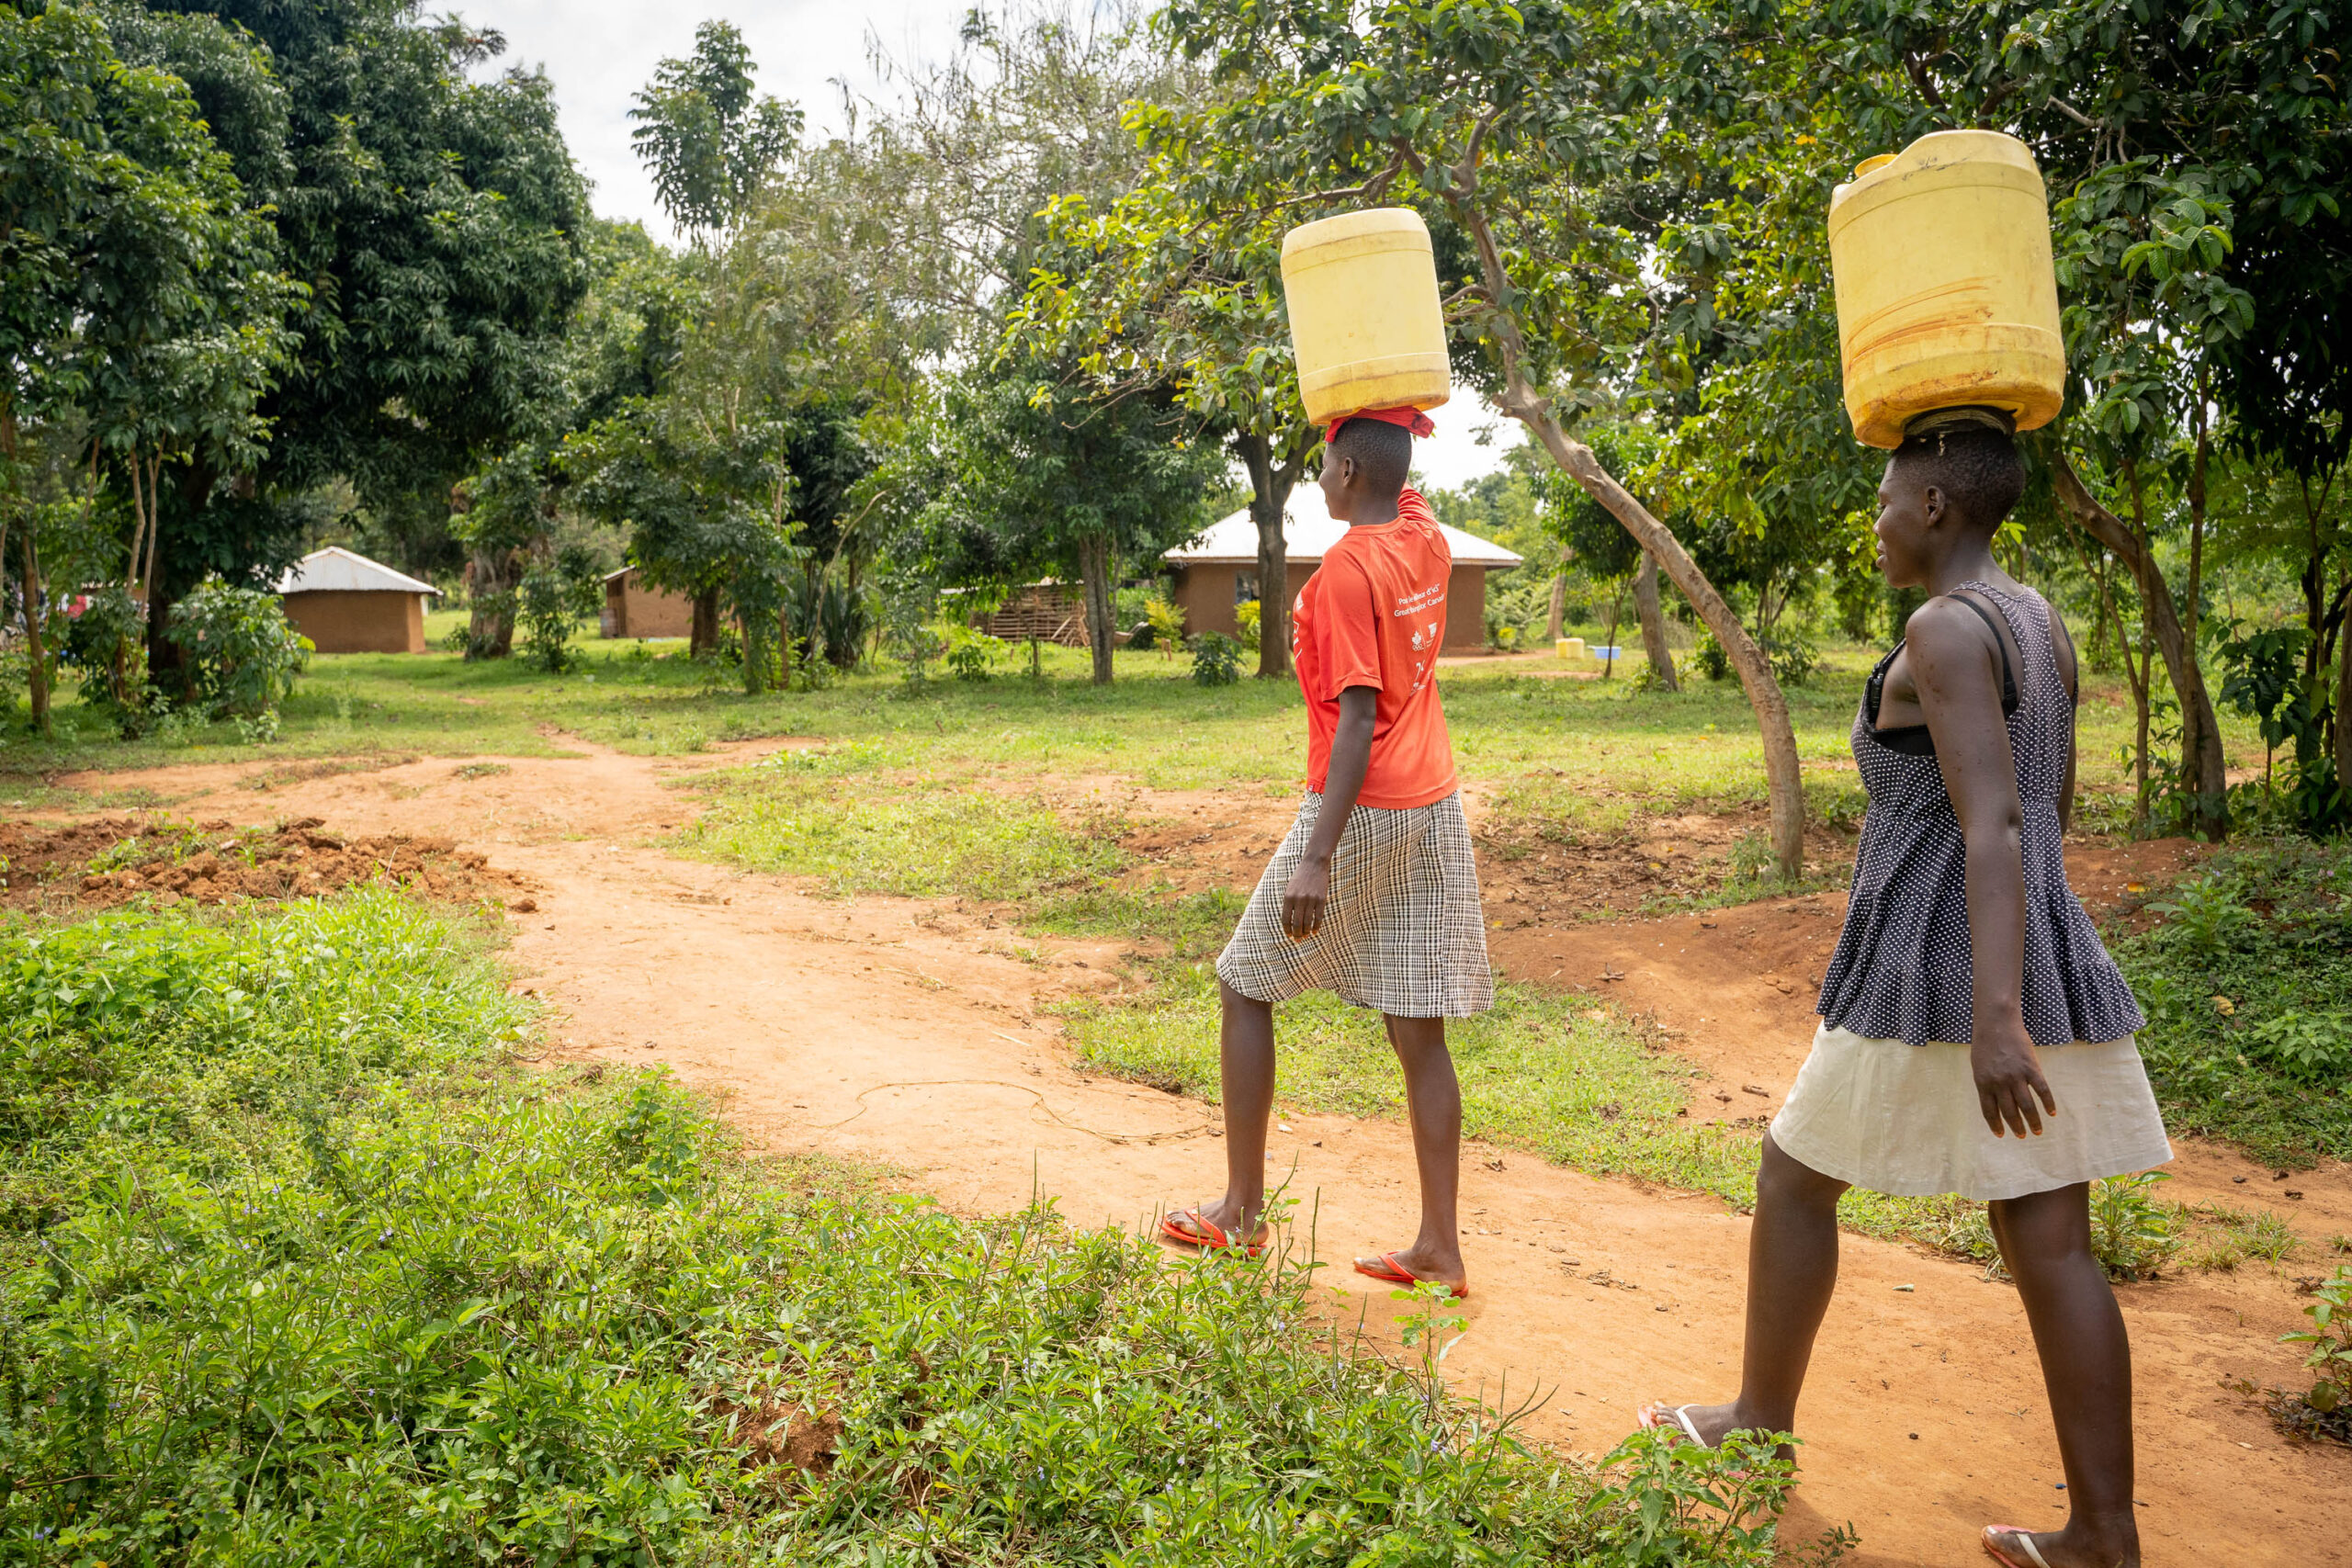 Women walking with jerrycans on their heads